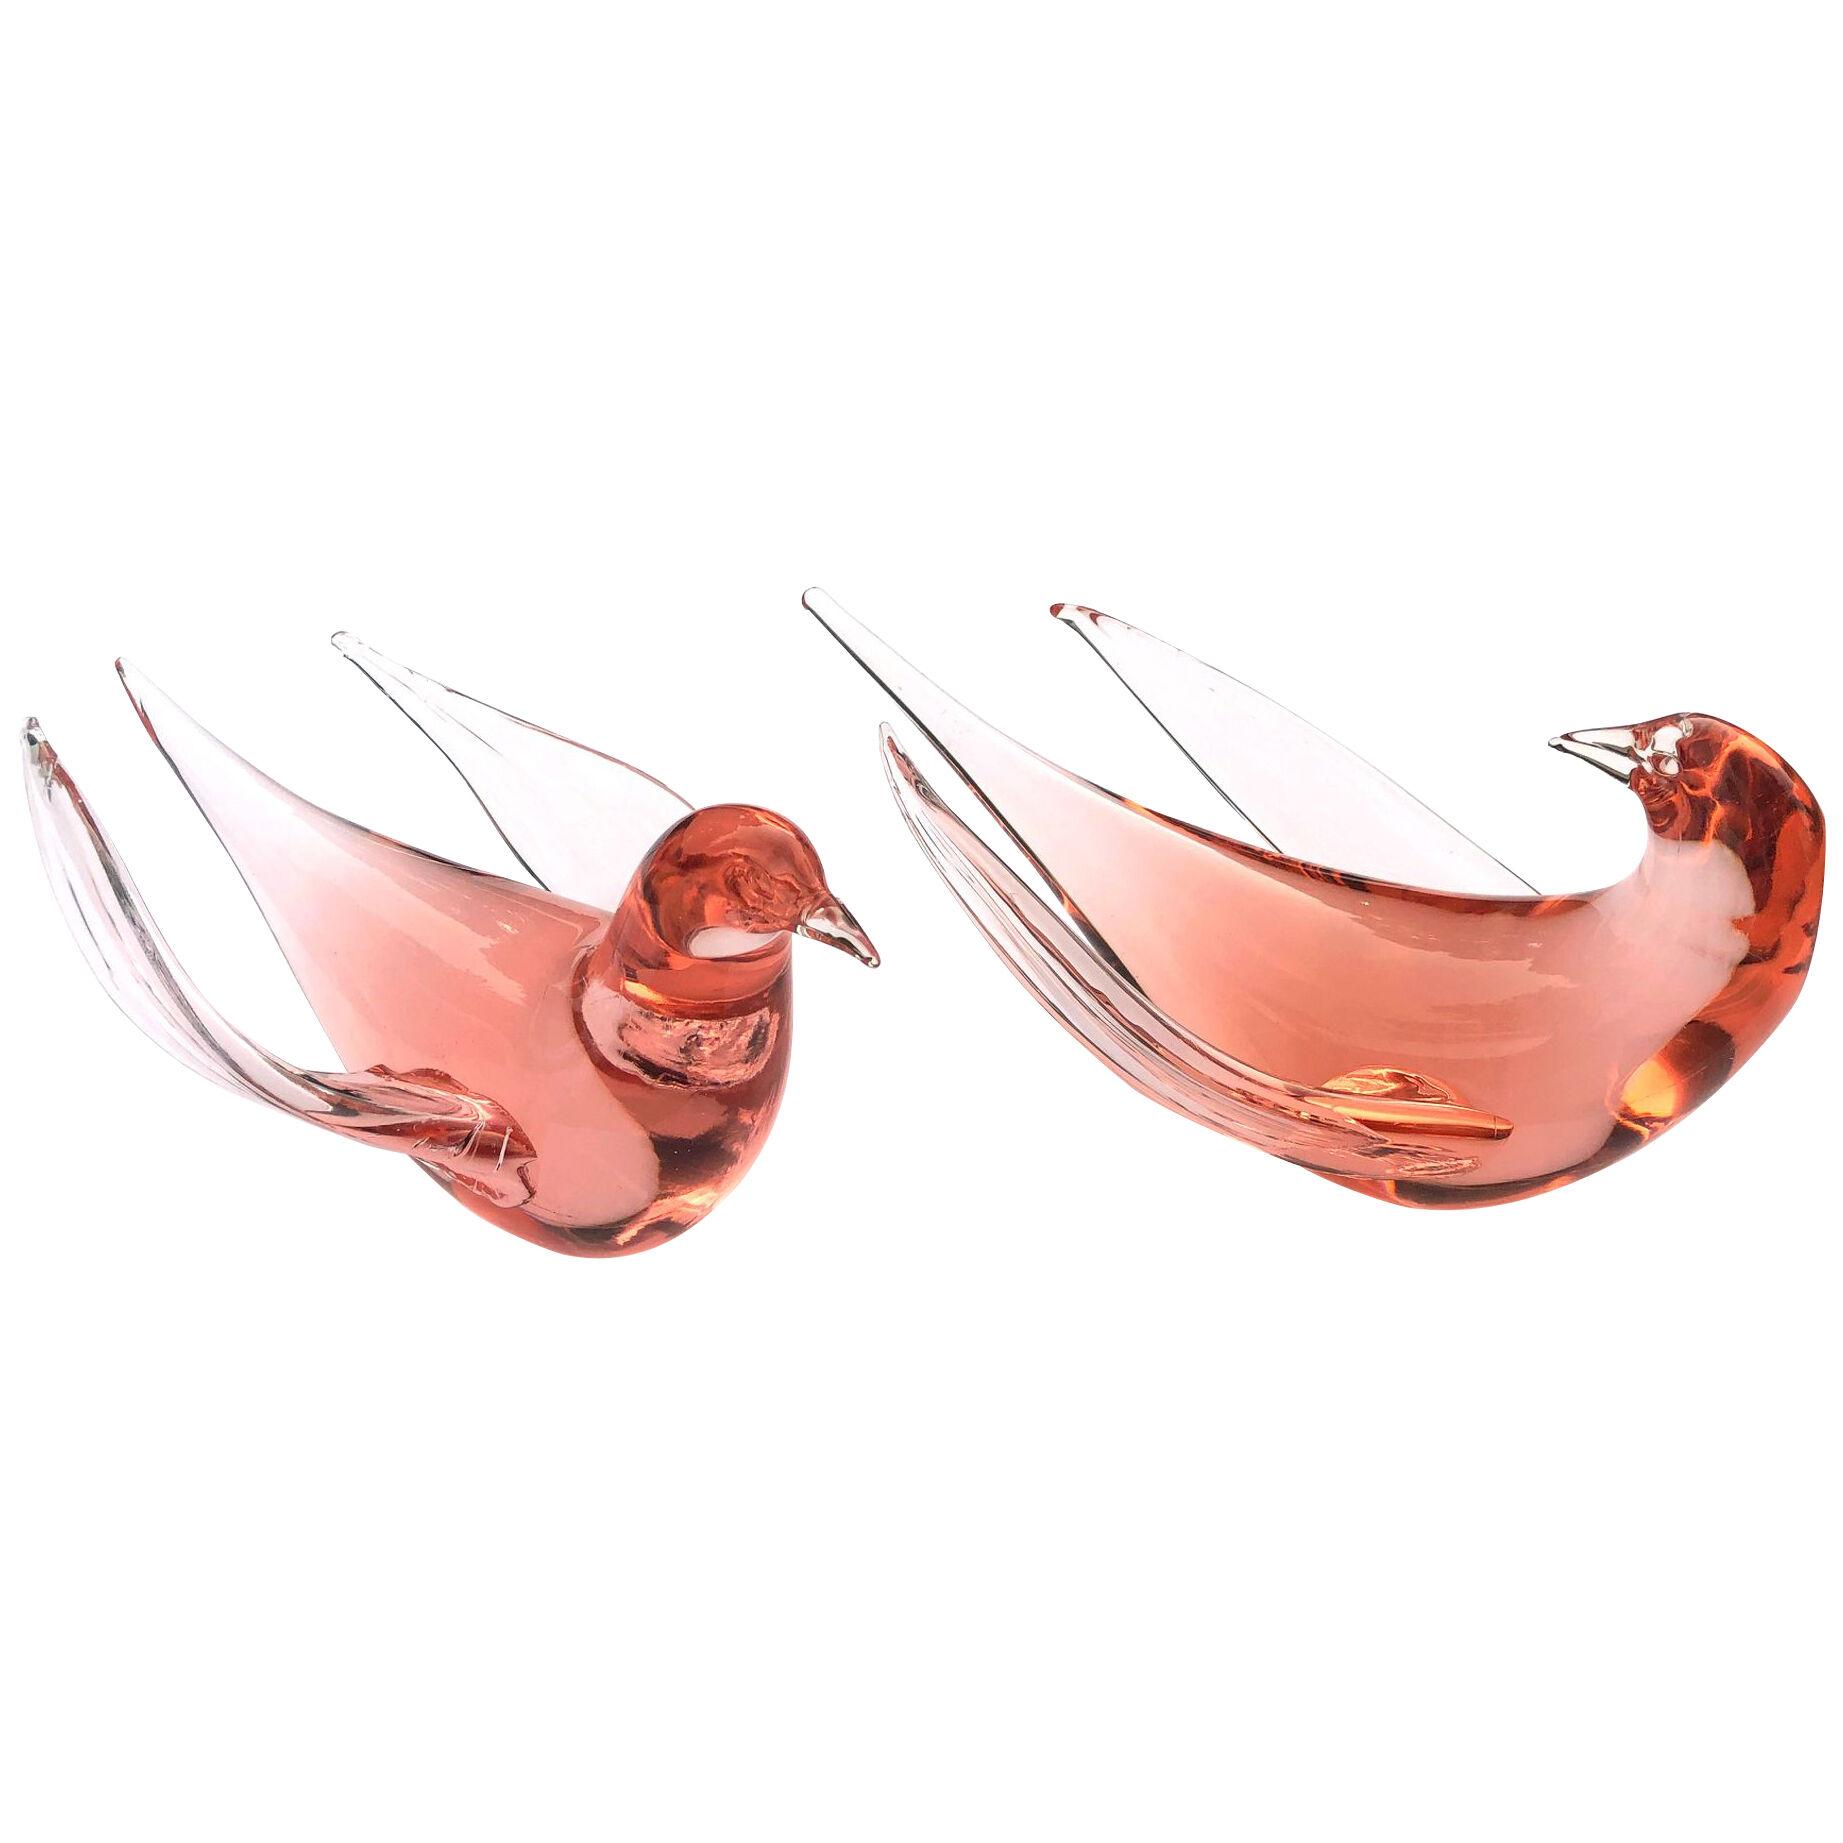 Pair Murano Midcentury Coral-colored Art Glass Birds, 1950's.